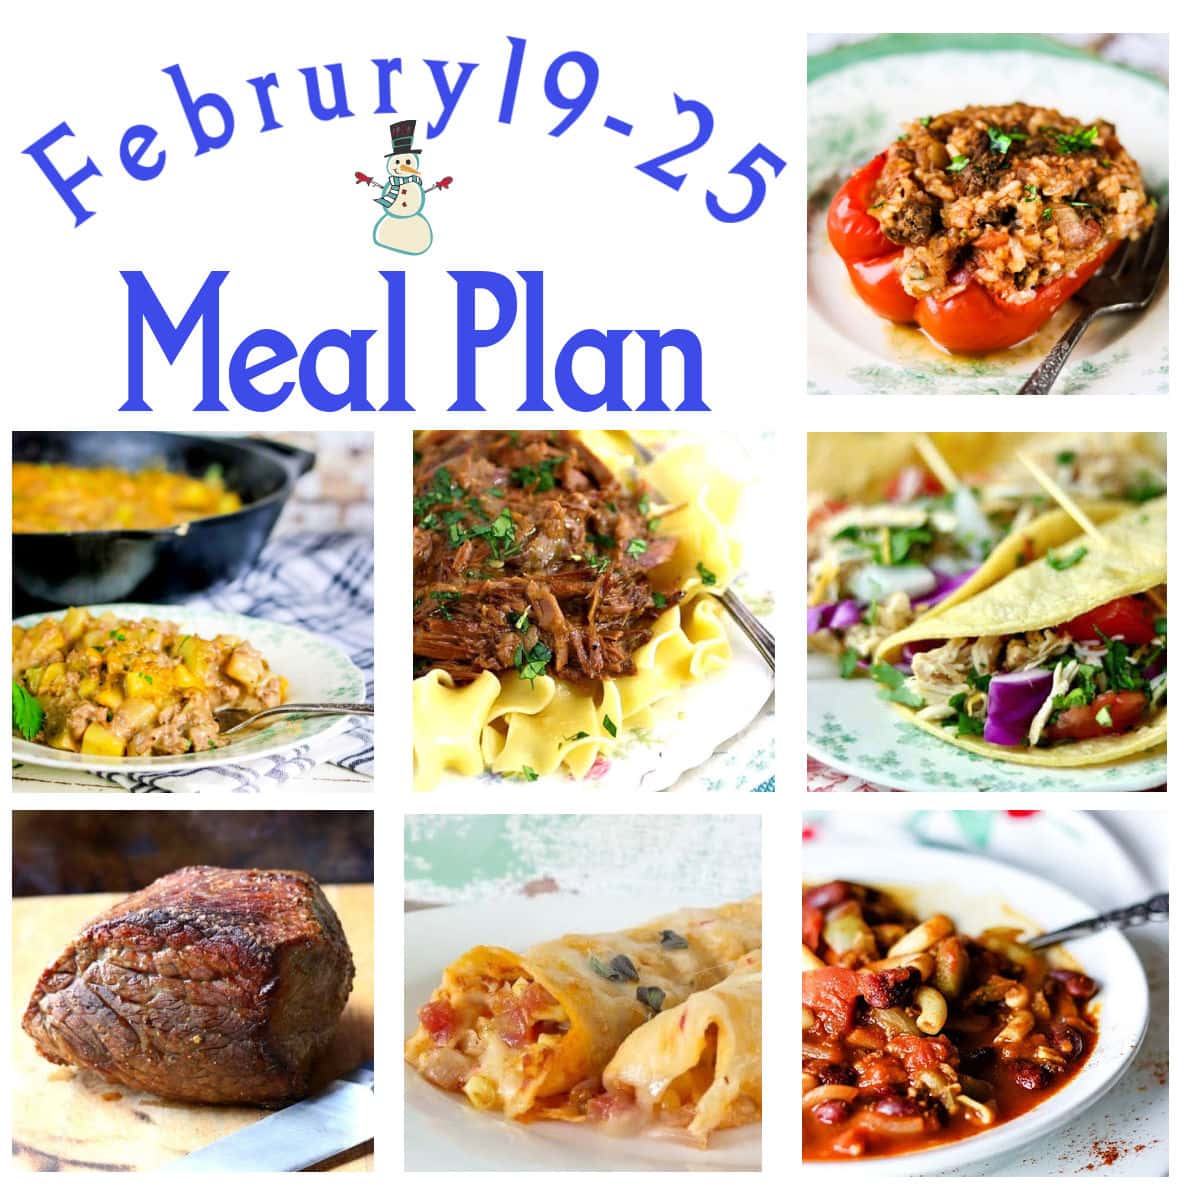 Collage of images from the meal plan.